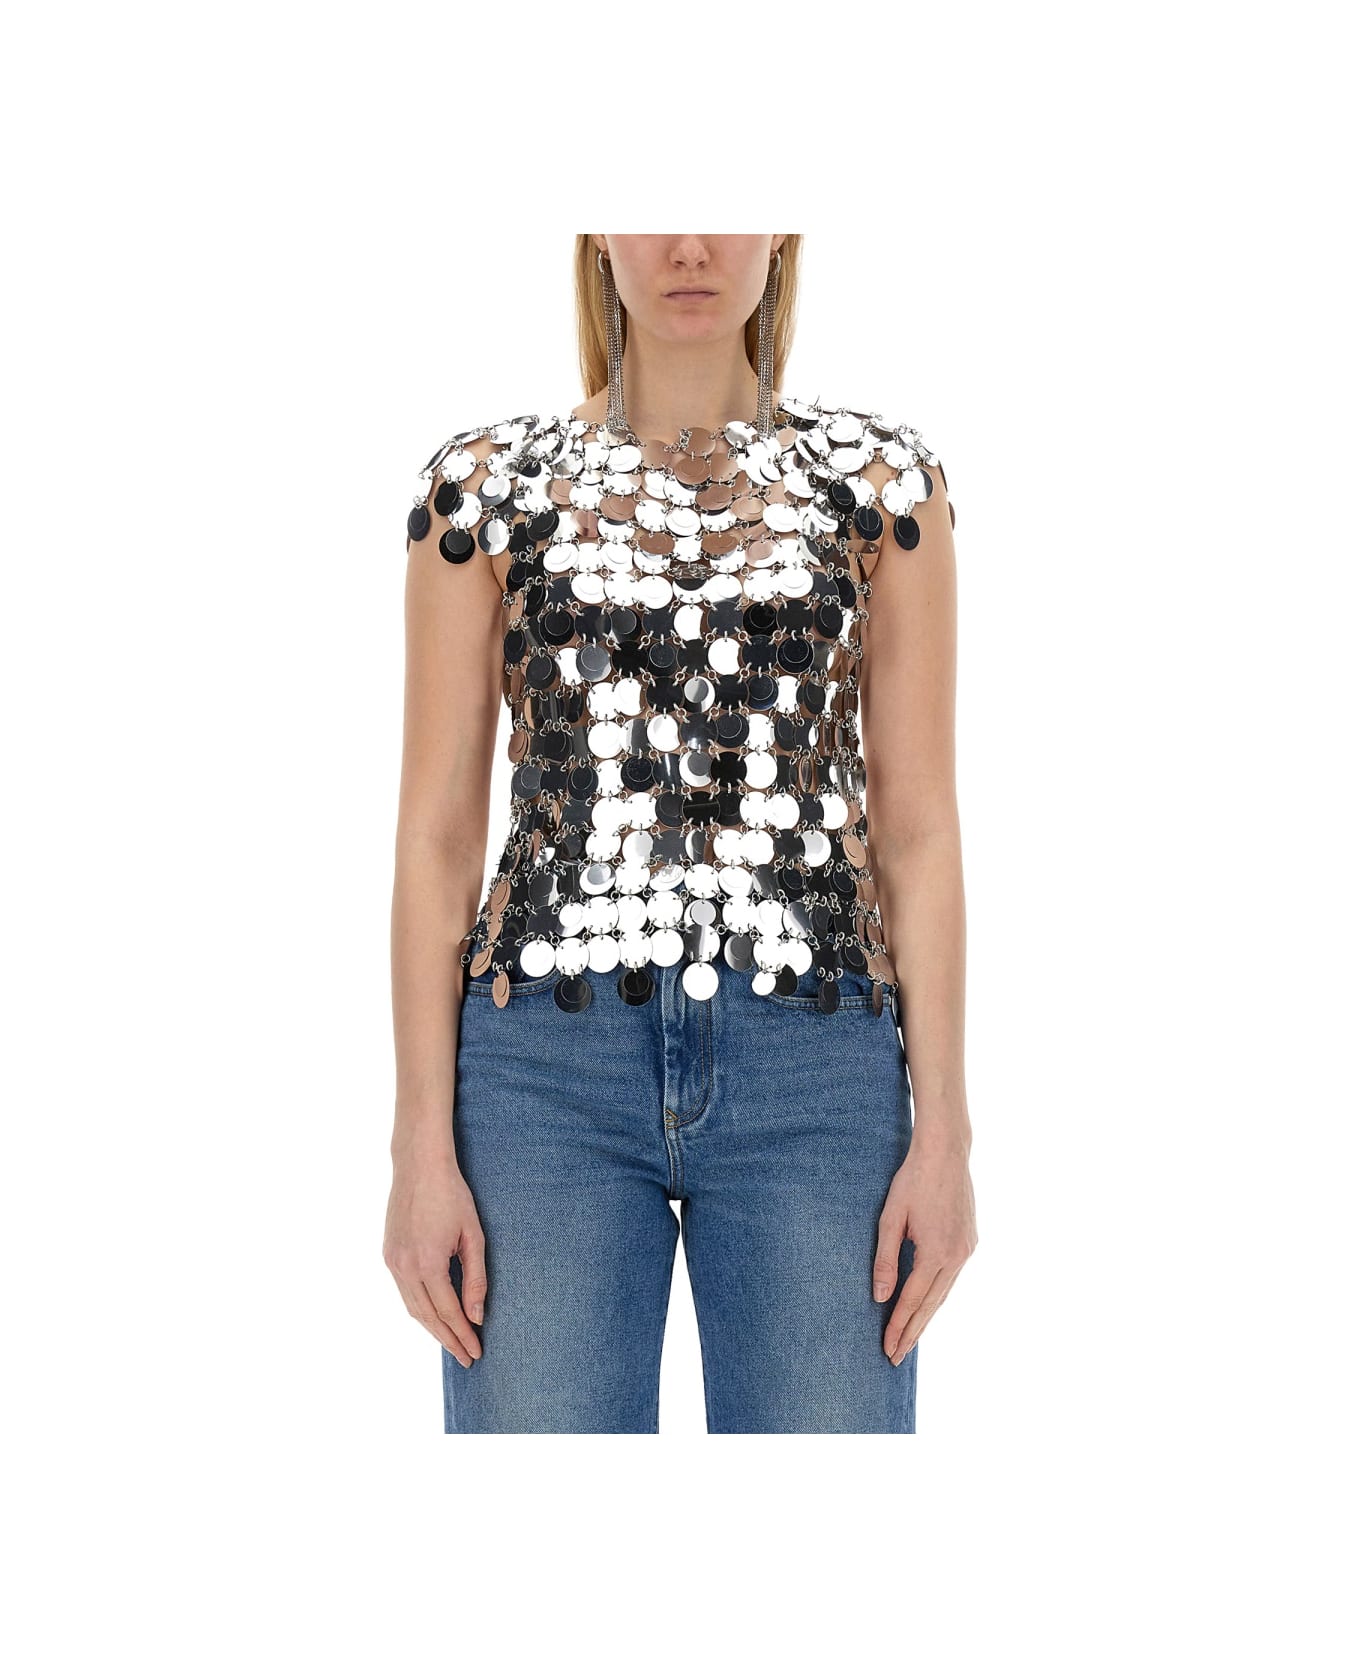 Paco Rabanne Top Iconic - SILVER トップス